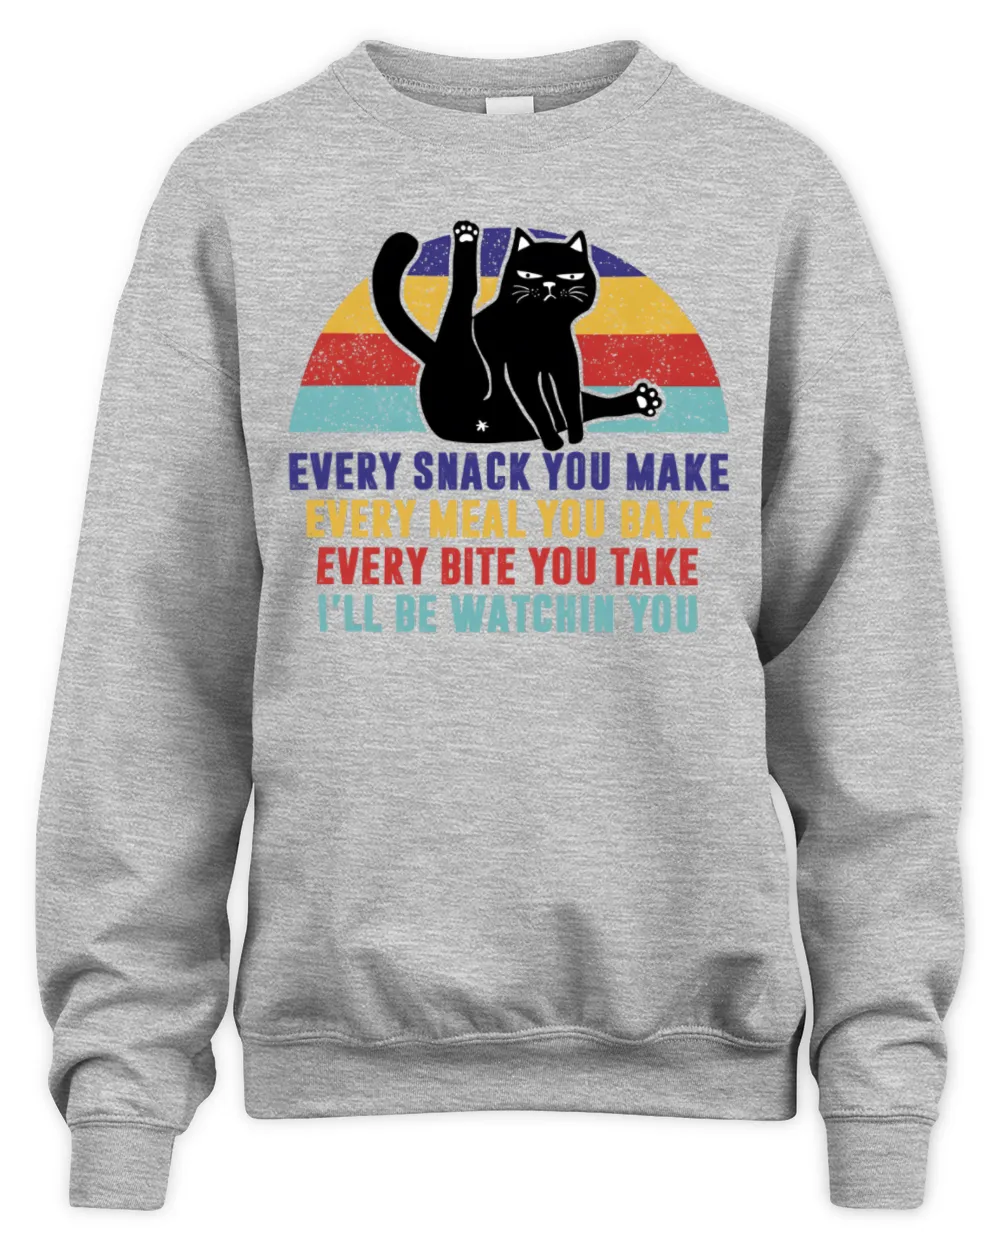 Vintage Every Snack You Make Every Meal You Bake I’ll Be Watching You, Cat Lover Tee, Cute Meow Cat Lover Tee, Cat Life Shirt